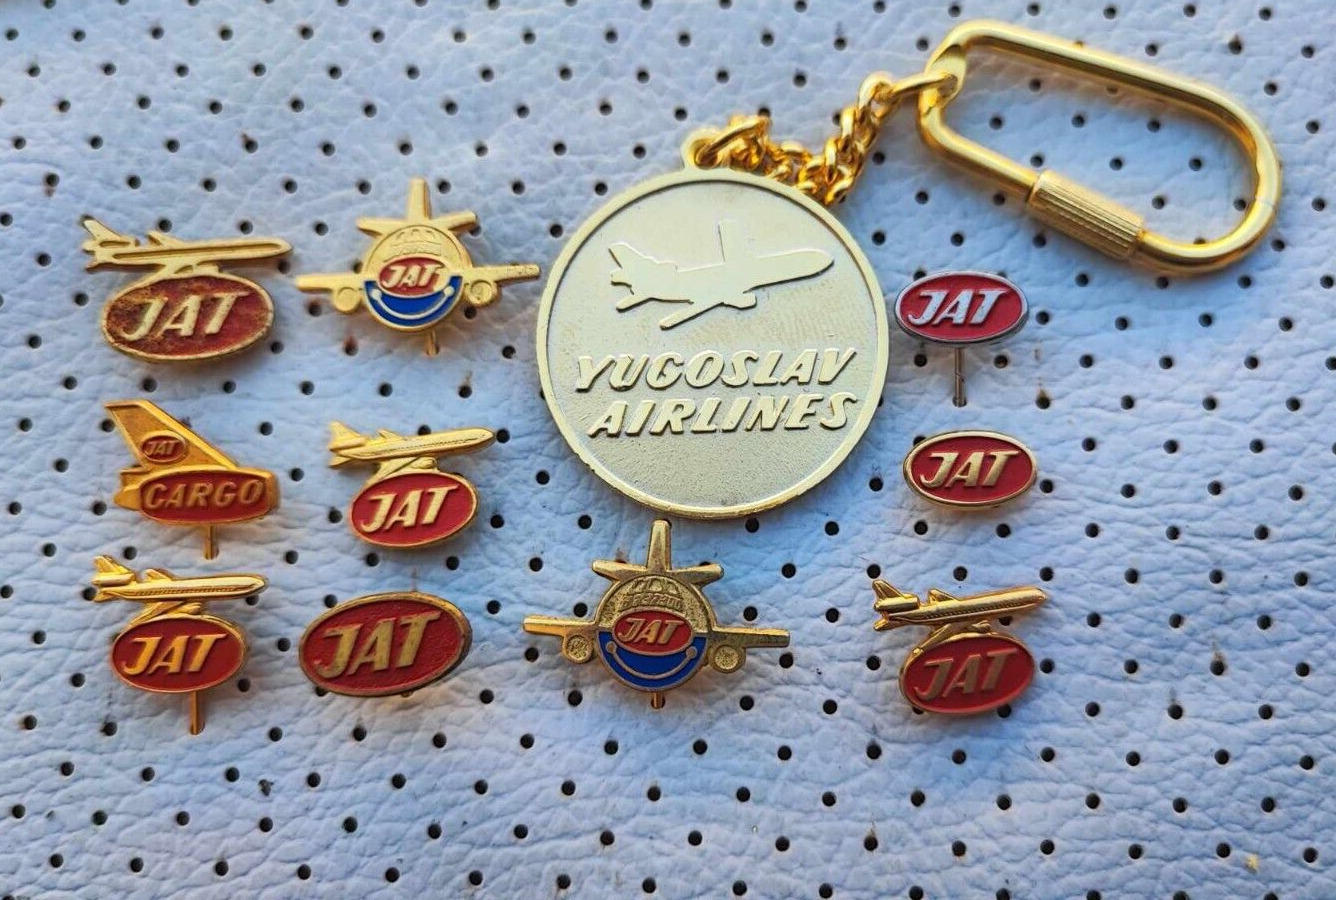 JAT Airlines Yugoslavia Vintage Pins and Keychain Aviation Badges Collection